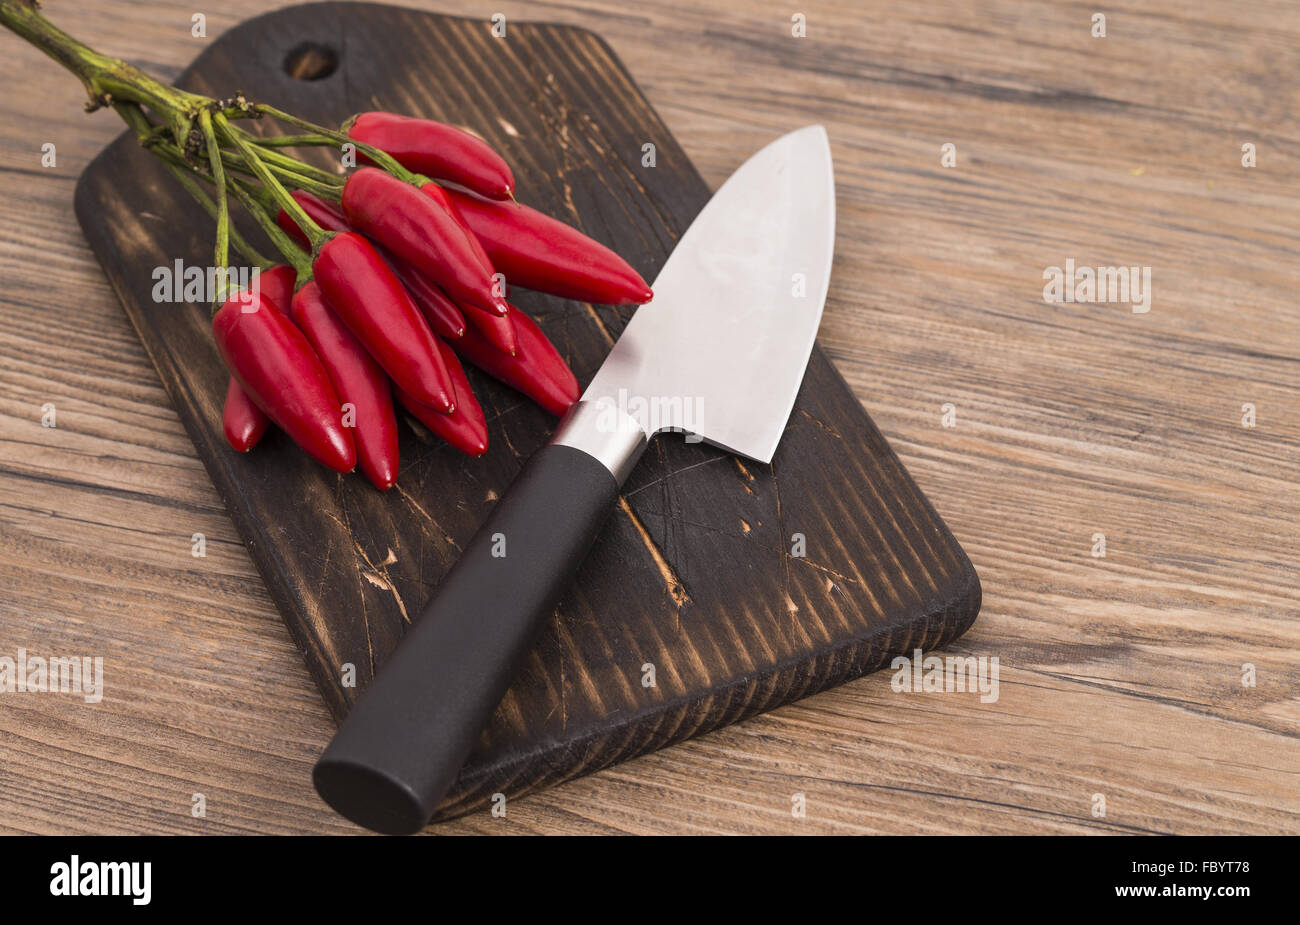 Red peppers with knife Stock Photo